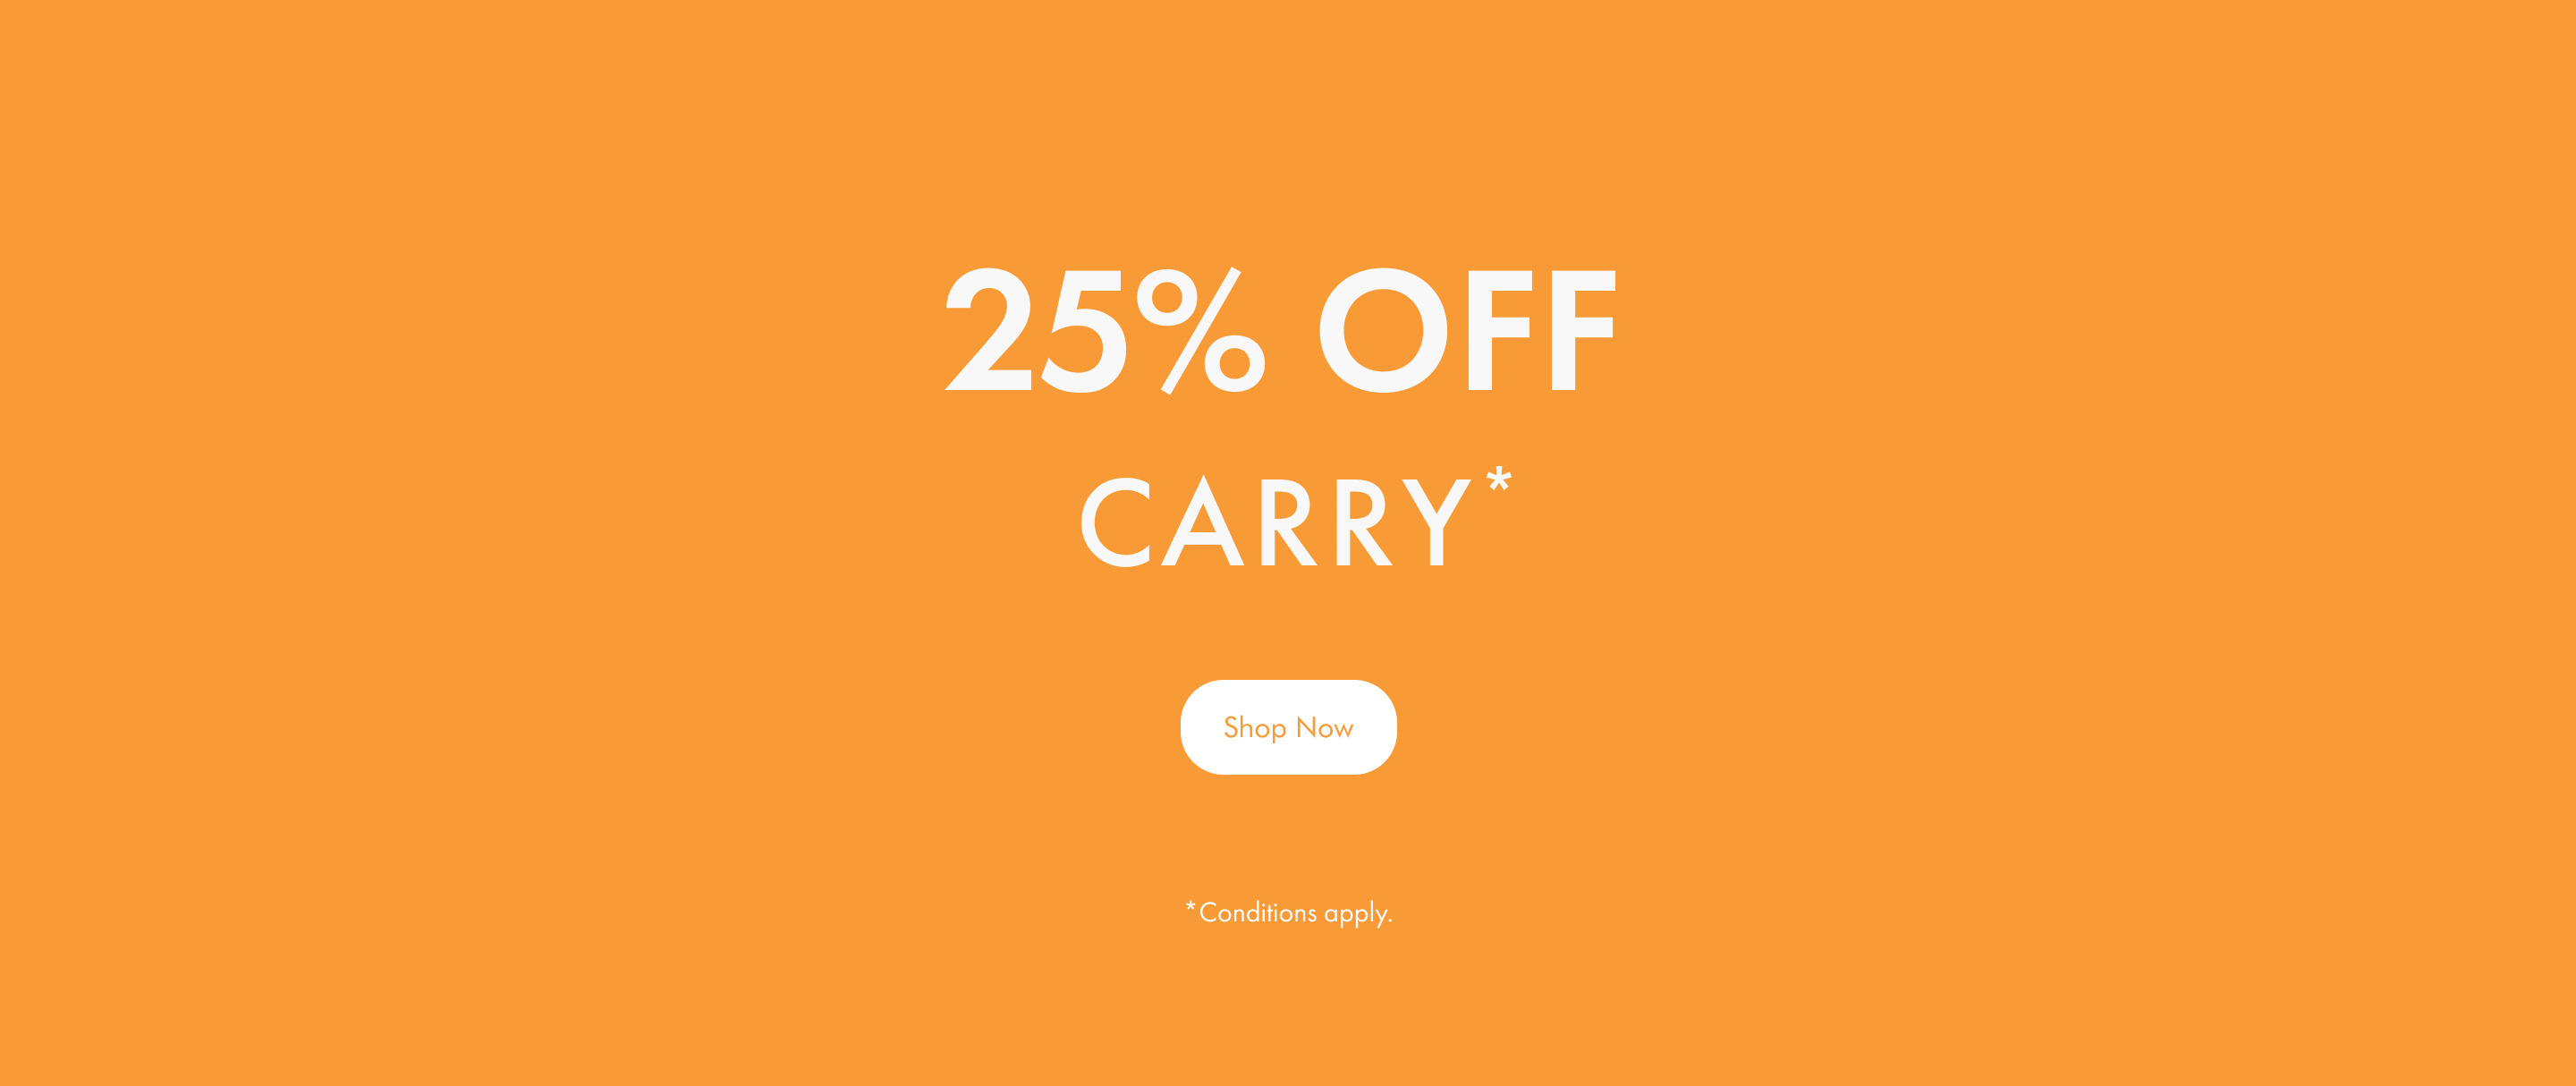 25% Off Bags, Totes, Minis & Wallets